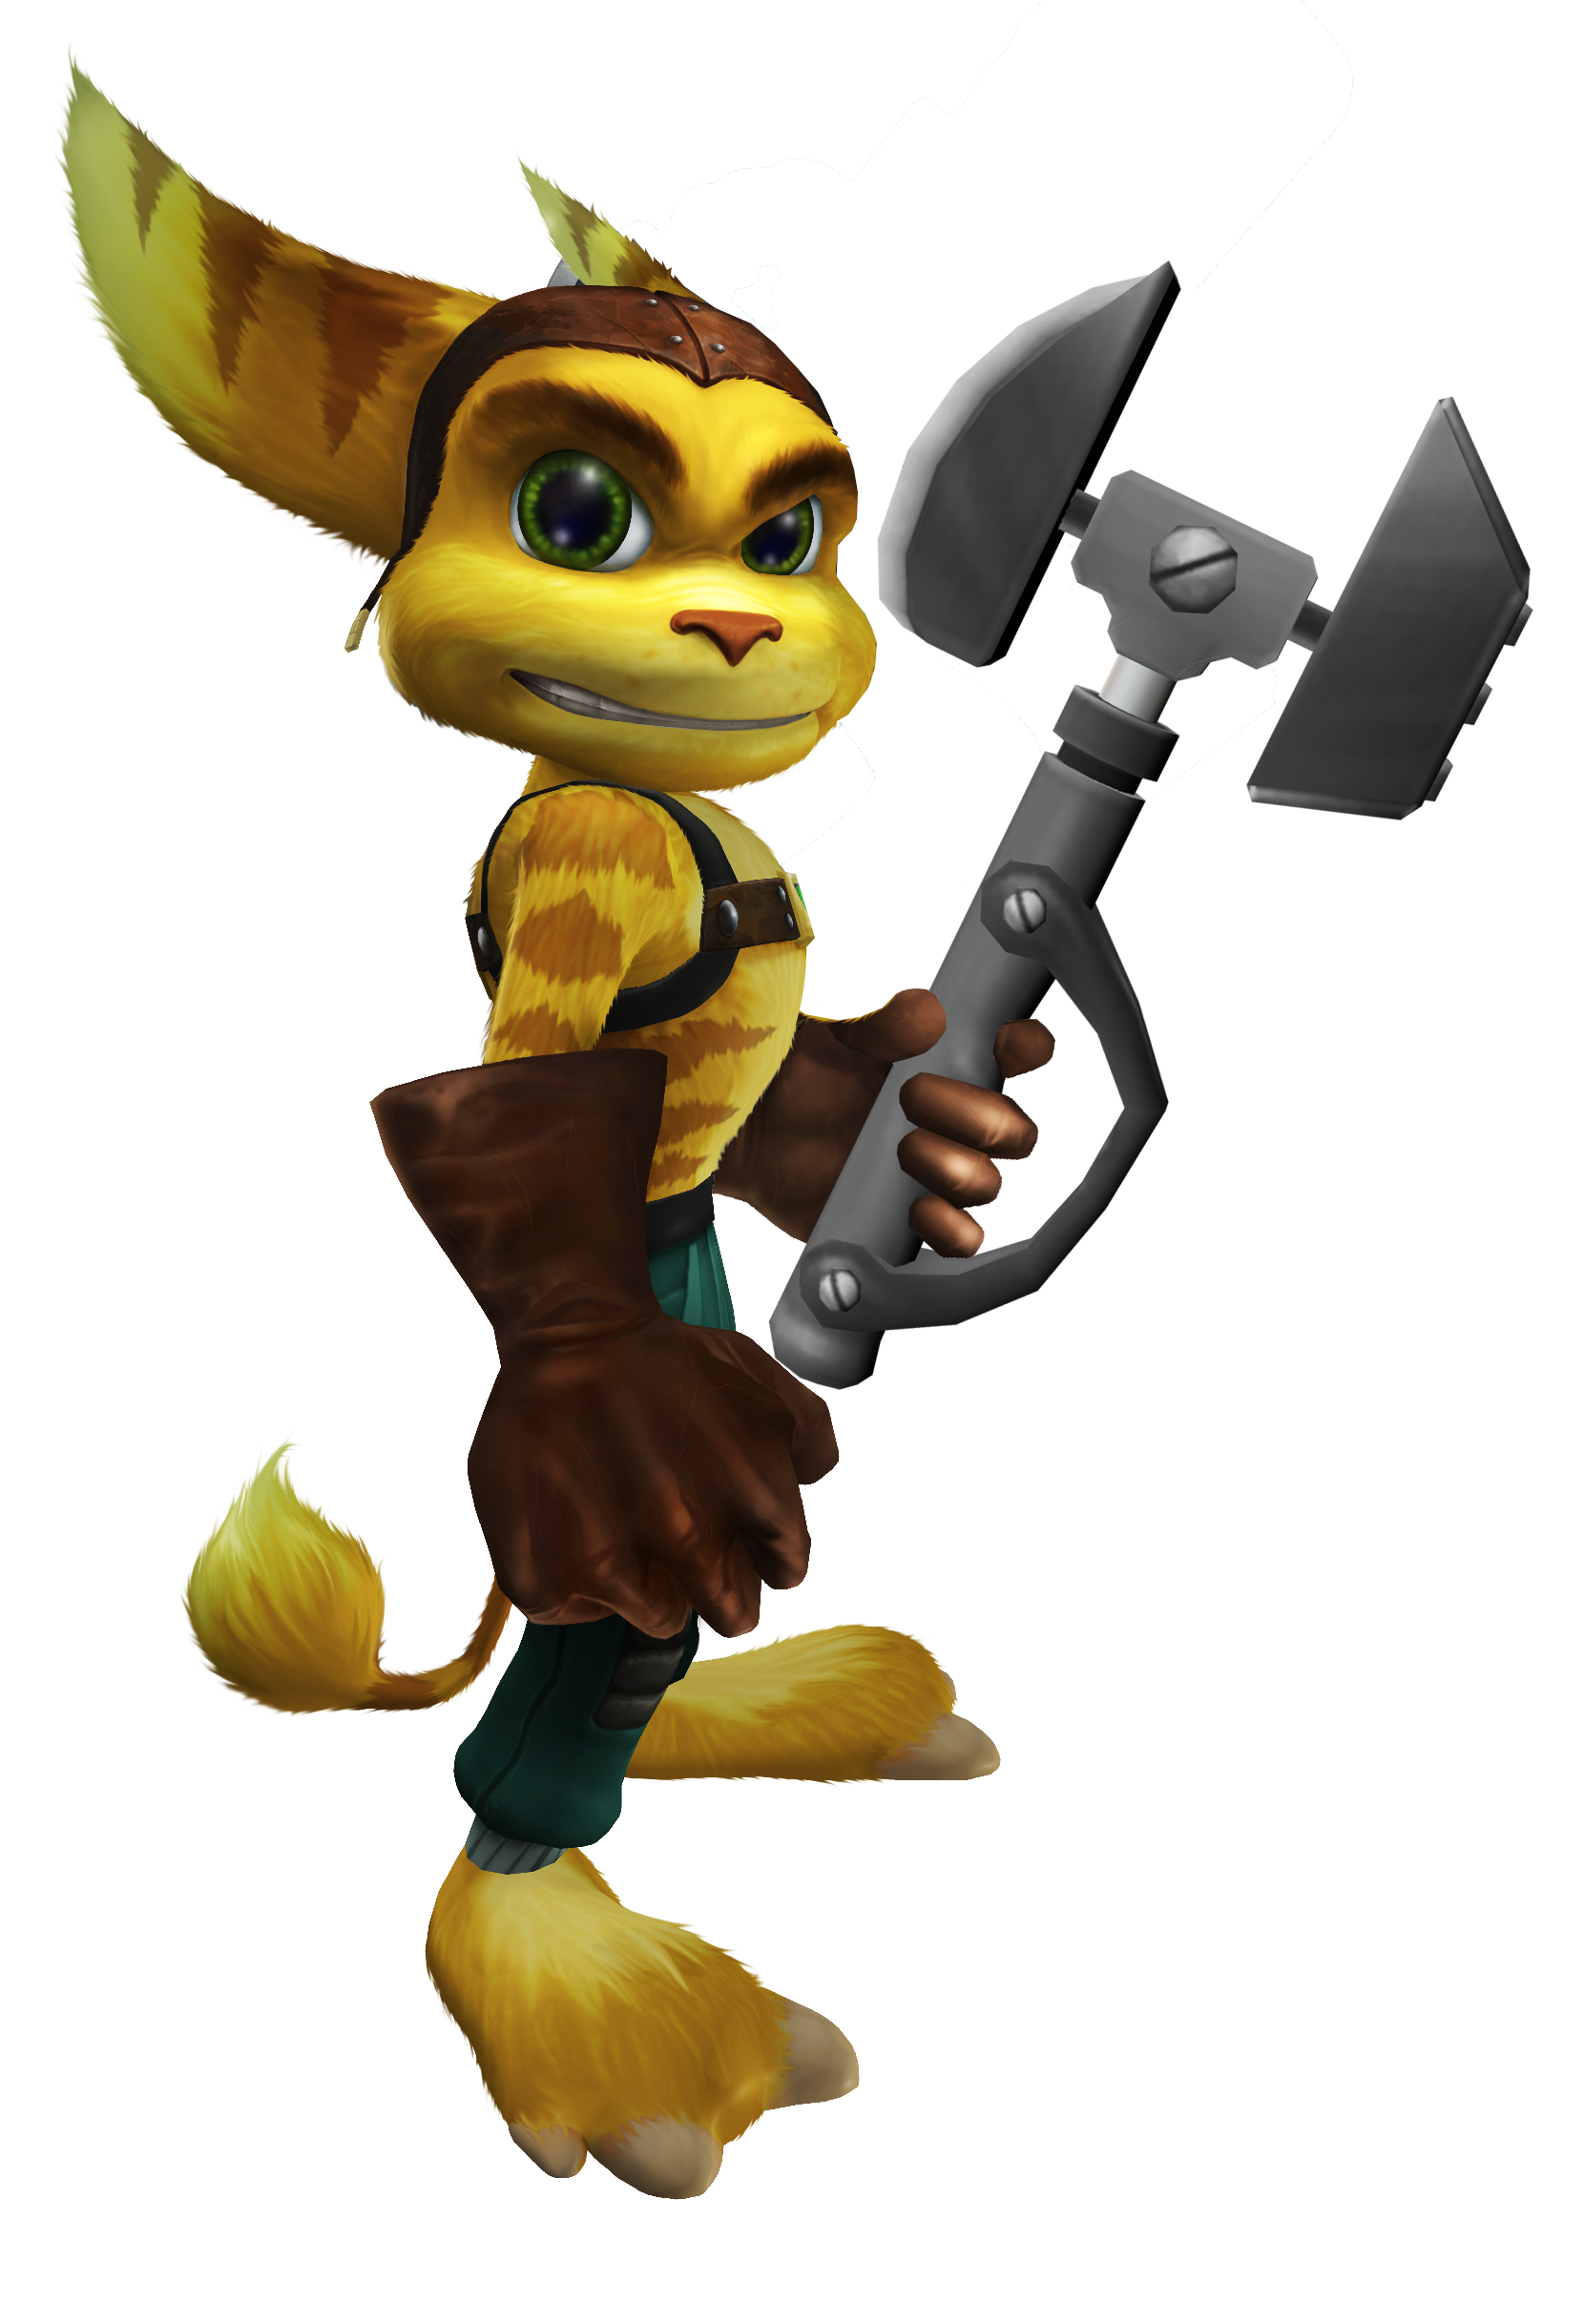 clank ratchet and clank